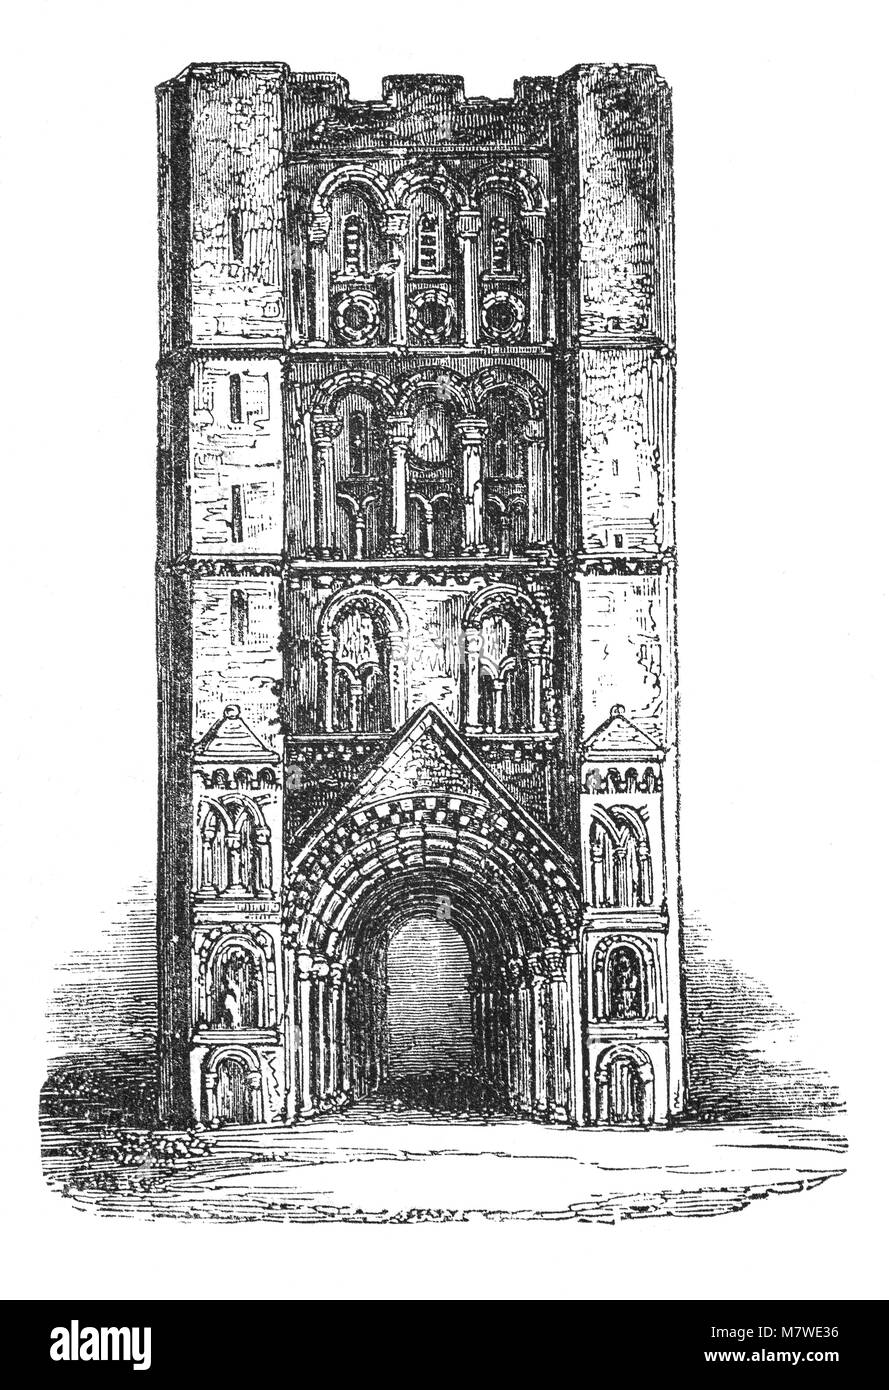 The Norman Gateway of The Abbey, as it was in Saxon times. It was the entrance to one of the richest Benedictine monasteries in England, until the Dissolution of the monasteries in 1539. It was the burial place of the Anglo-Saxon martyr-king Saint Edmund, killed by the Great Heathen Army of Danes in 869 and became a centre of pilgrimage, Suffolk, England Stock Photo